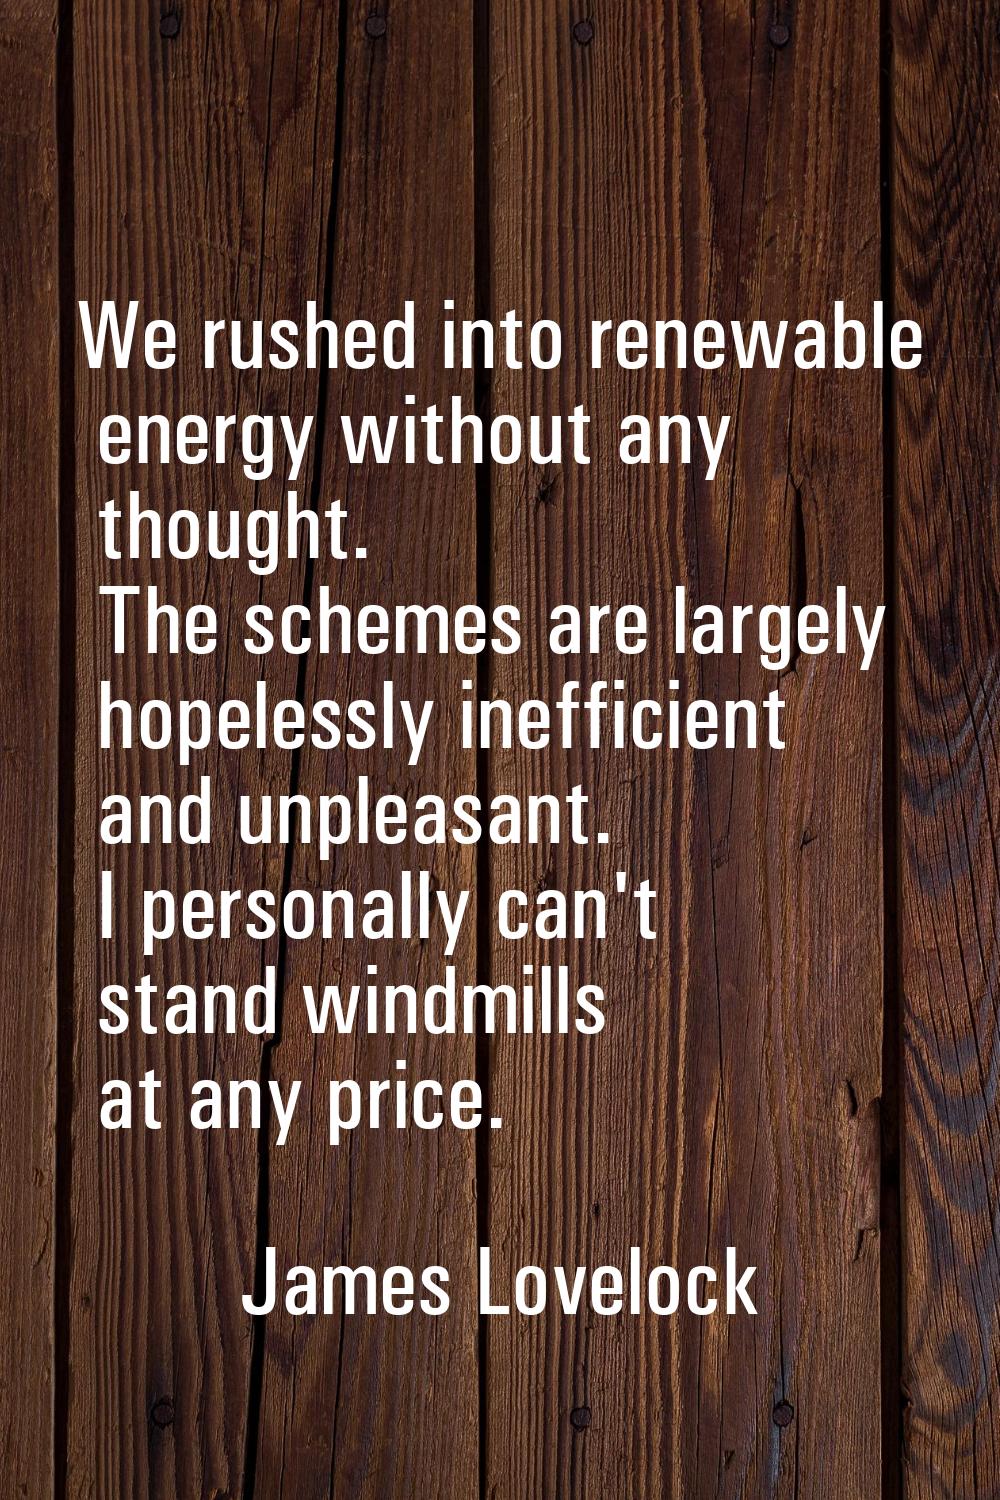 We rushed into renewable energy without any thought. The schemes are largely hopelessly inefficient